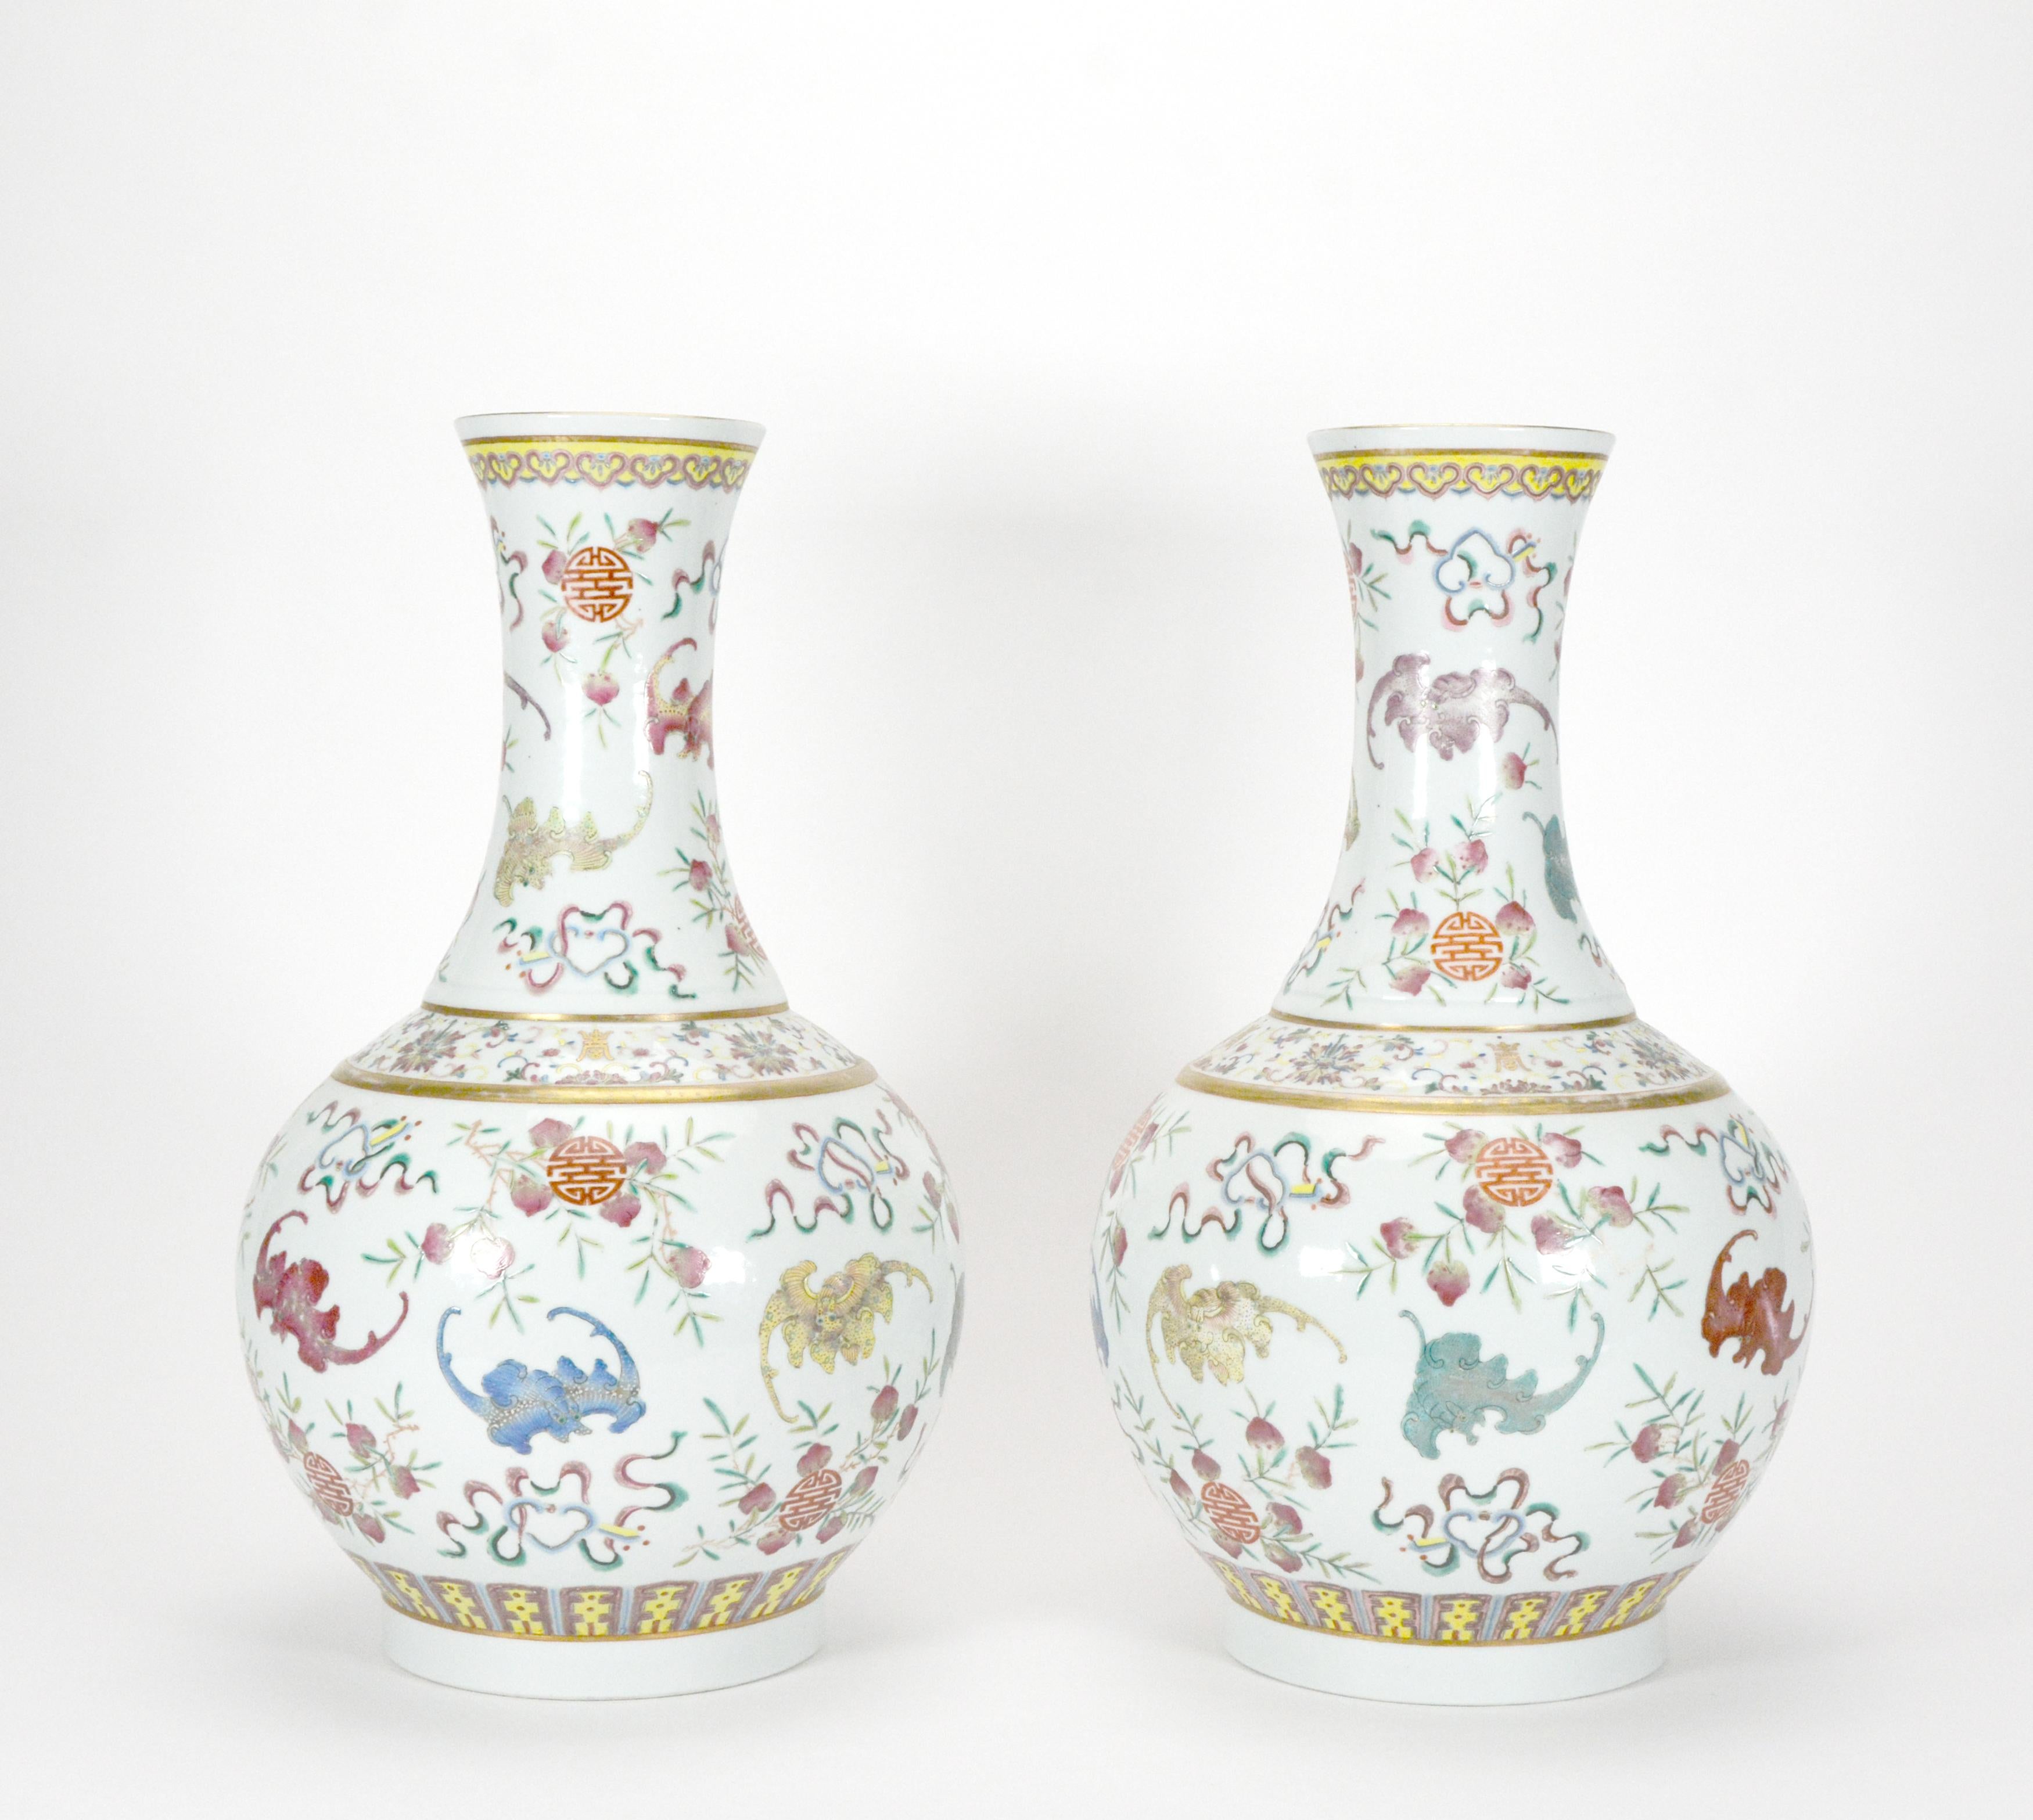 For your consideration is a pair of finely hand painted Chinese globular porcelain vases, from early 20th century. The heavy porcelain body is in elegant globular form and covered with thick creamy white glaze. The top opening rim is painted with